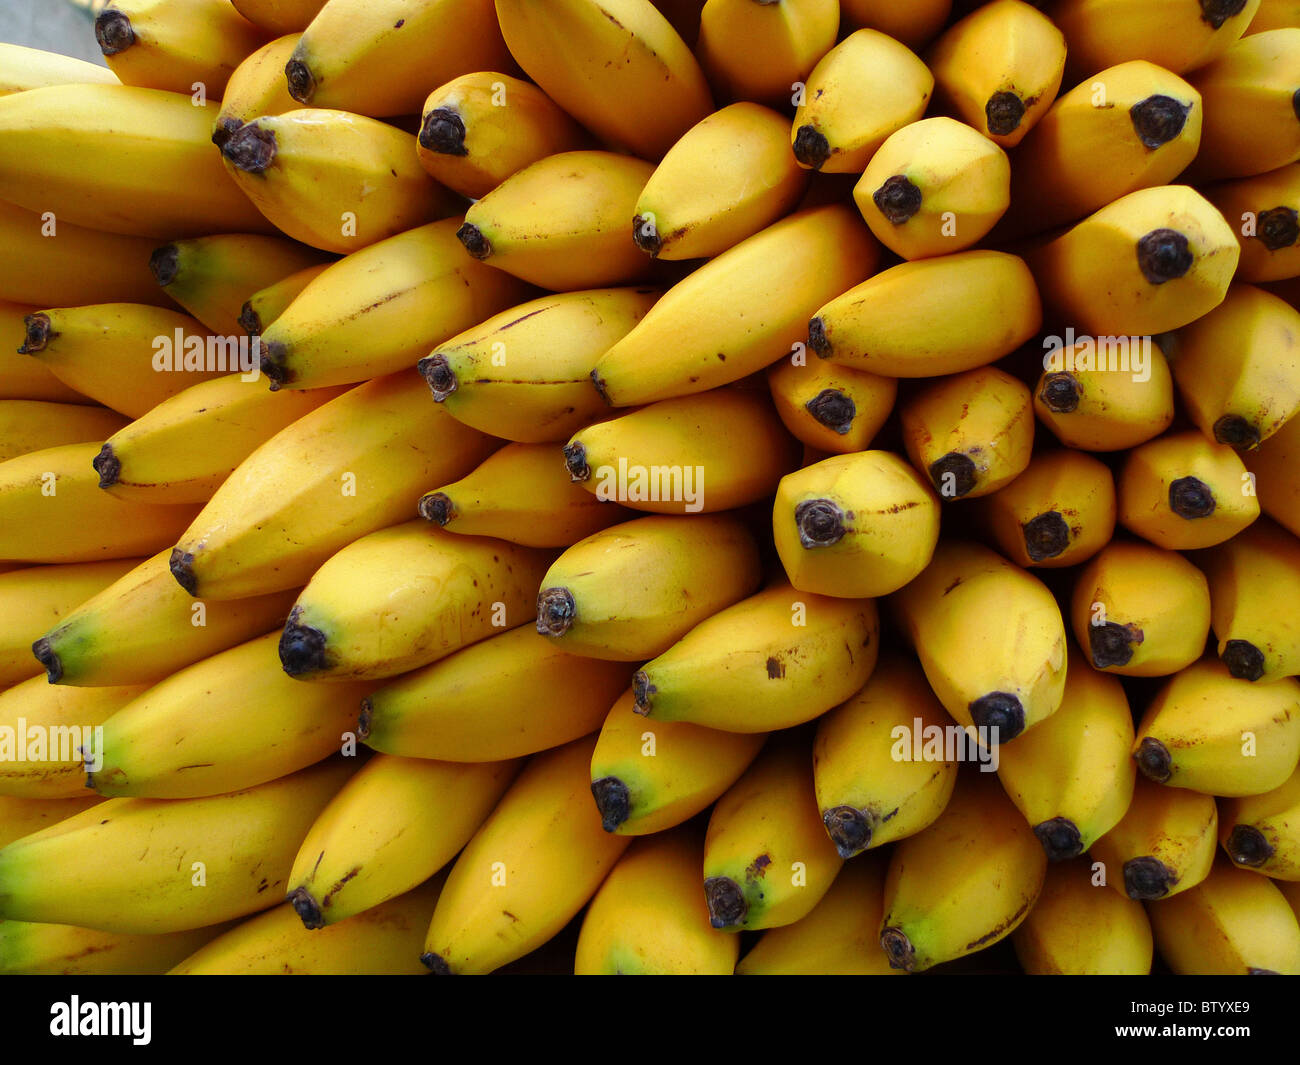 1,100+ Large Bunch Of Bananas Stock Photos, Pictures & Royalty